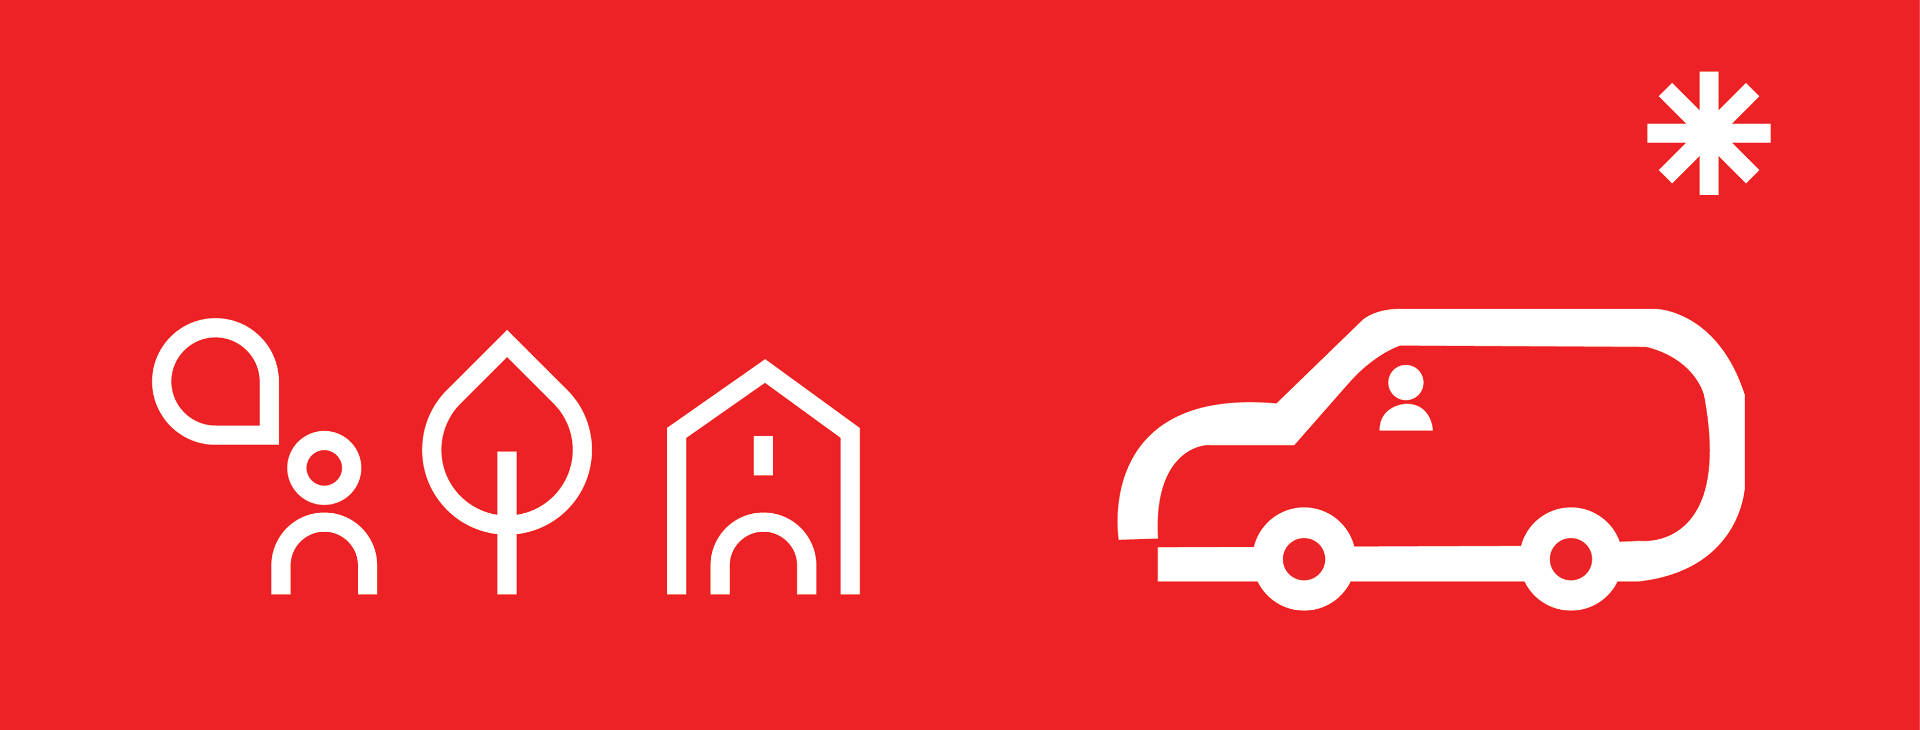 Red background, white shapes of the person, tree, house and car.